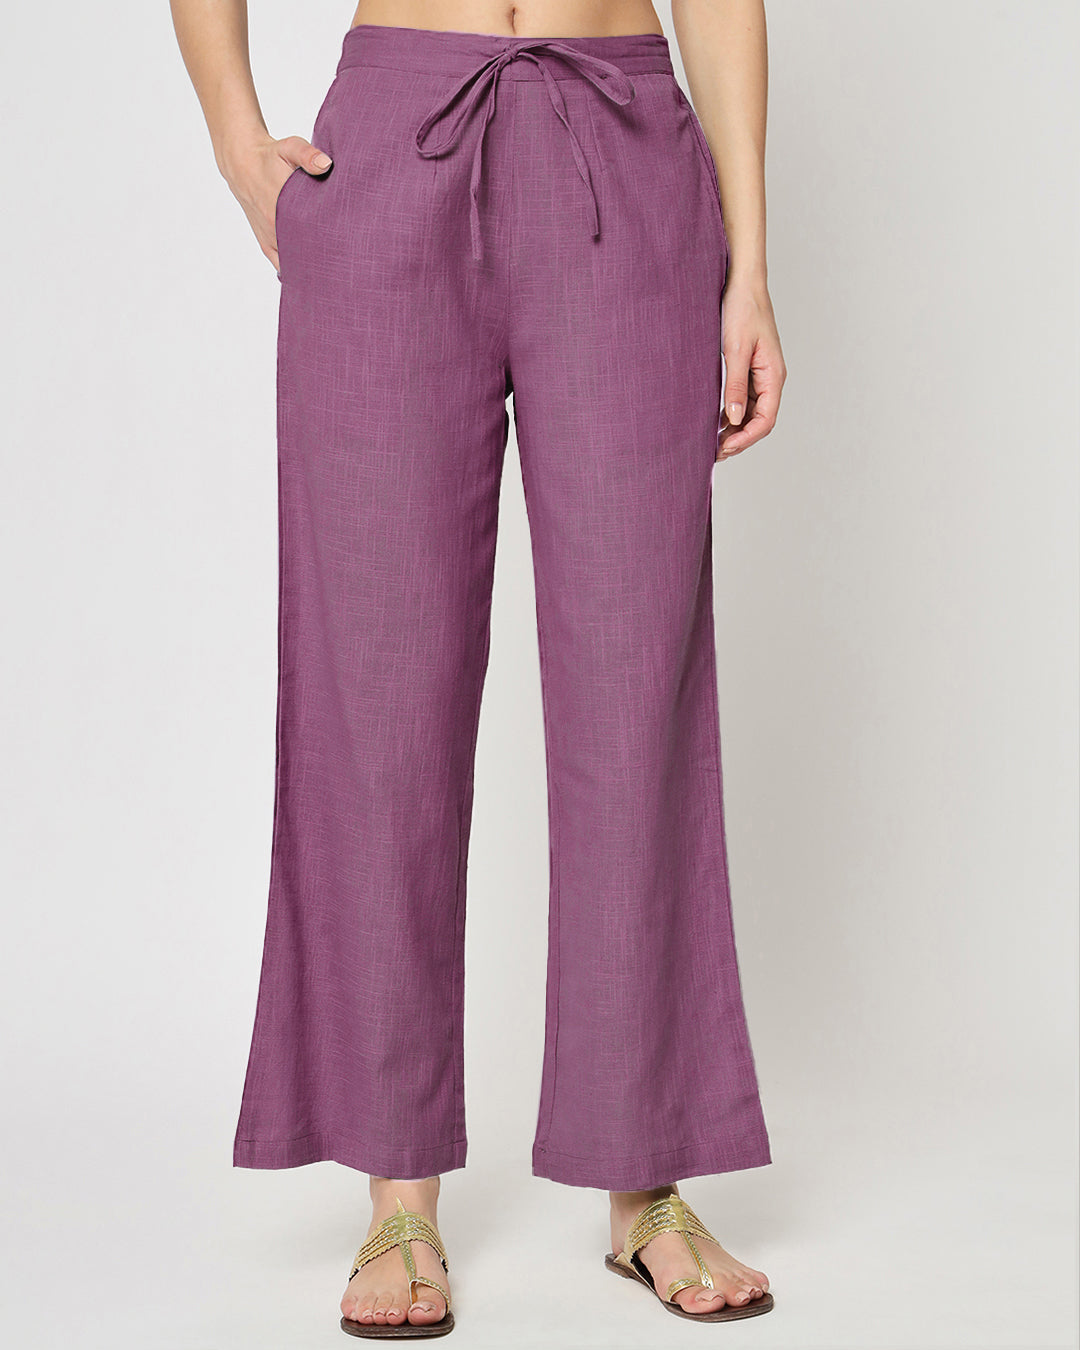 Wisteria Purple Gathered Solid Co-ord Set